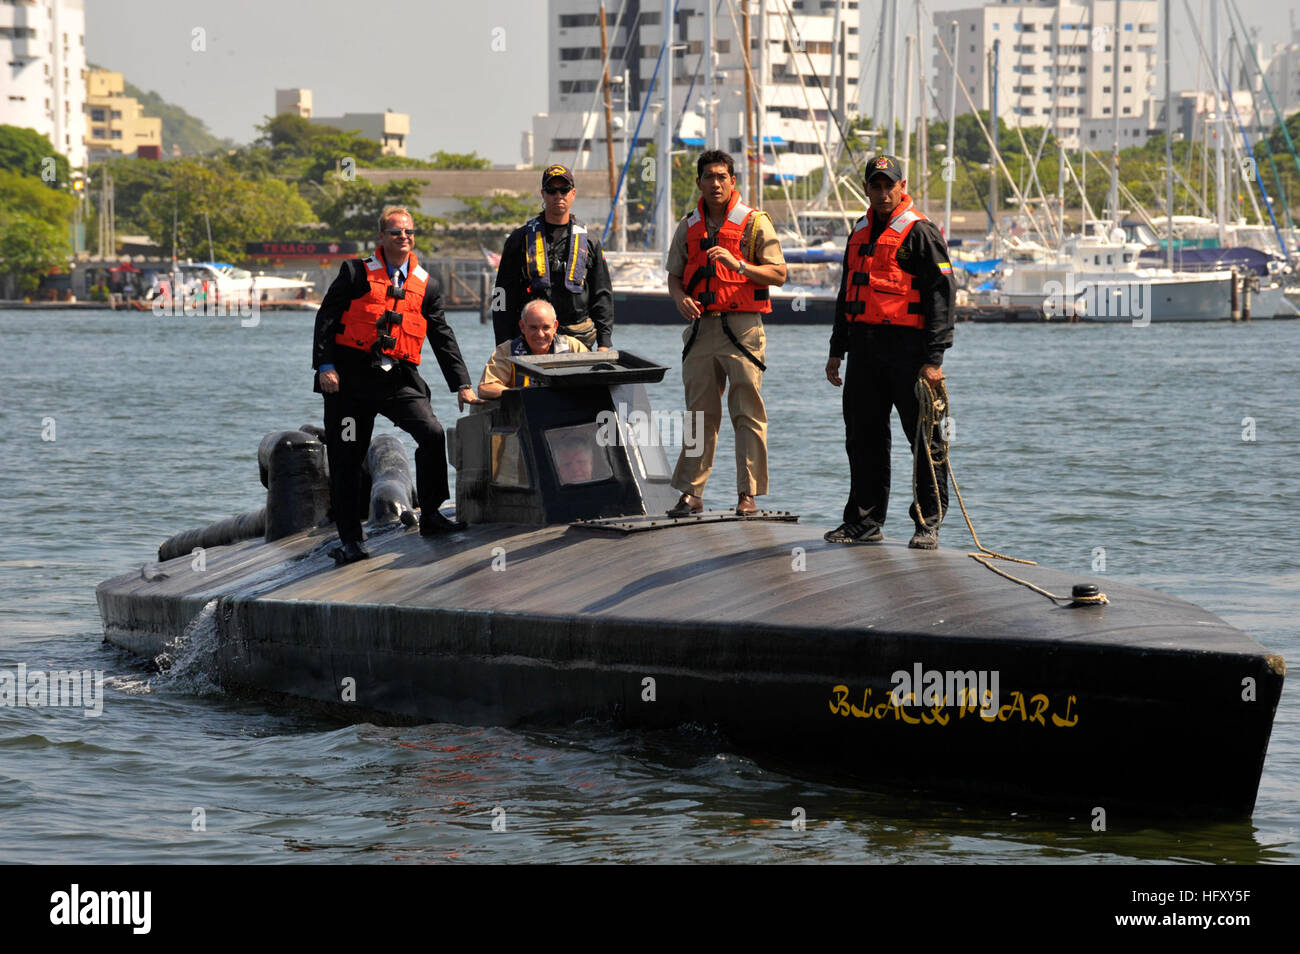 091205-N-8273J-220  CARTAGENA, Colombia (Dec. 5, 2009) Chief of Naval Operations (CNO) Adm. Gary Roughead drives a semi-submersible boat while meeting with Colombian Coast Guard Forces at Naval Base Bolivar. The boat was seized from drug smugglers in the Caribbean. (U.S. Navy photo by Mass Communication Specialist 1st Class Tiffini Jones Vanderwyst/Released) US Navy 091205-N-8273J-220 Chief of Naval Operations (CNO) Adm. Gary Roughead drives a semi-submersible boat while meeting with Colombian Coast Guard Forces at Naval Base Bolivar Stock Photo